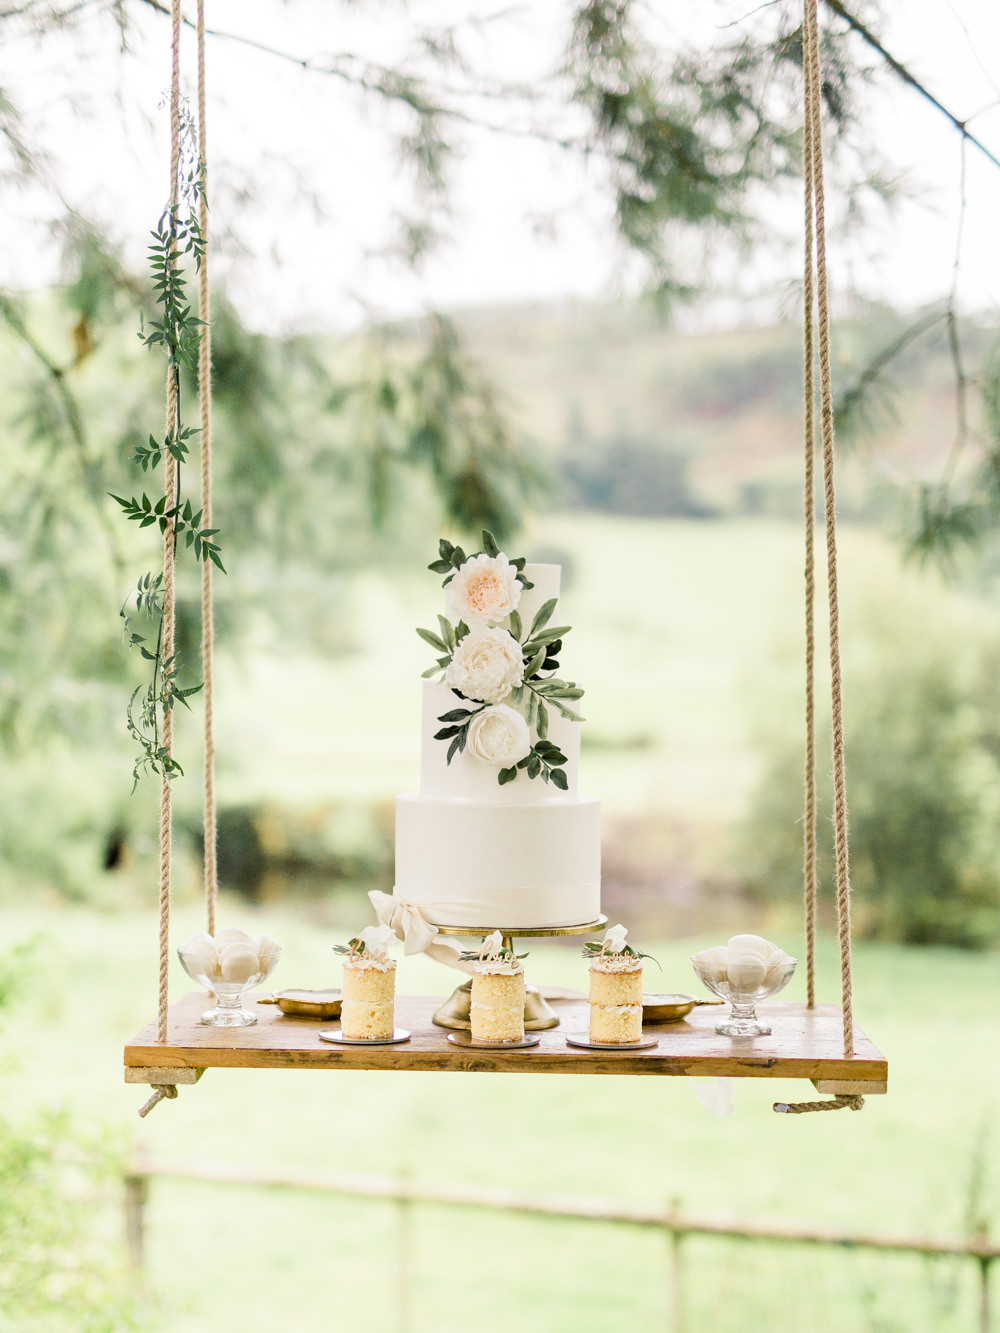 This minimalist all white wedding cake embellished with some greenery on a hanging swing is everything! // Jaw-dropping suspended cake display ideas for your wedding day. // mysweetengagement.com